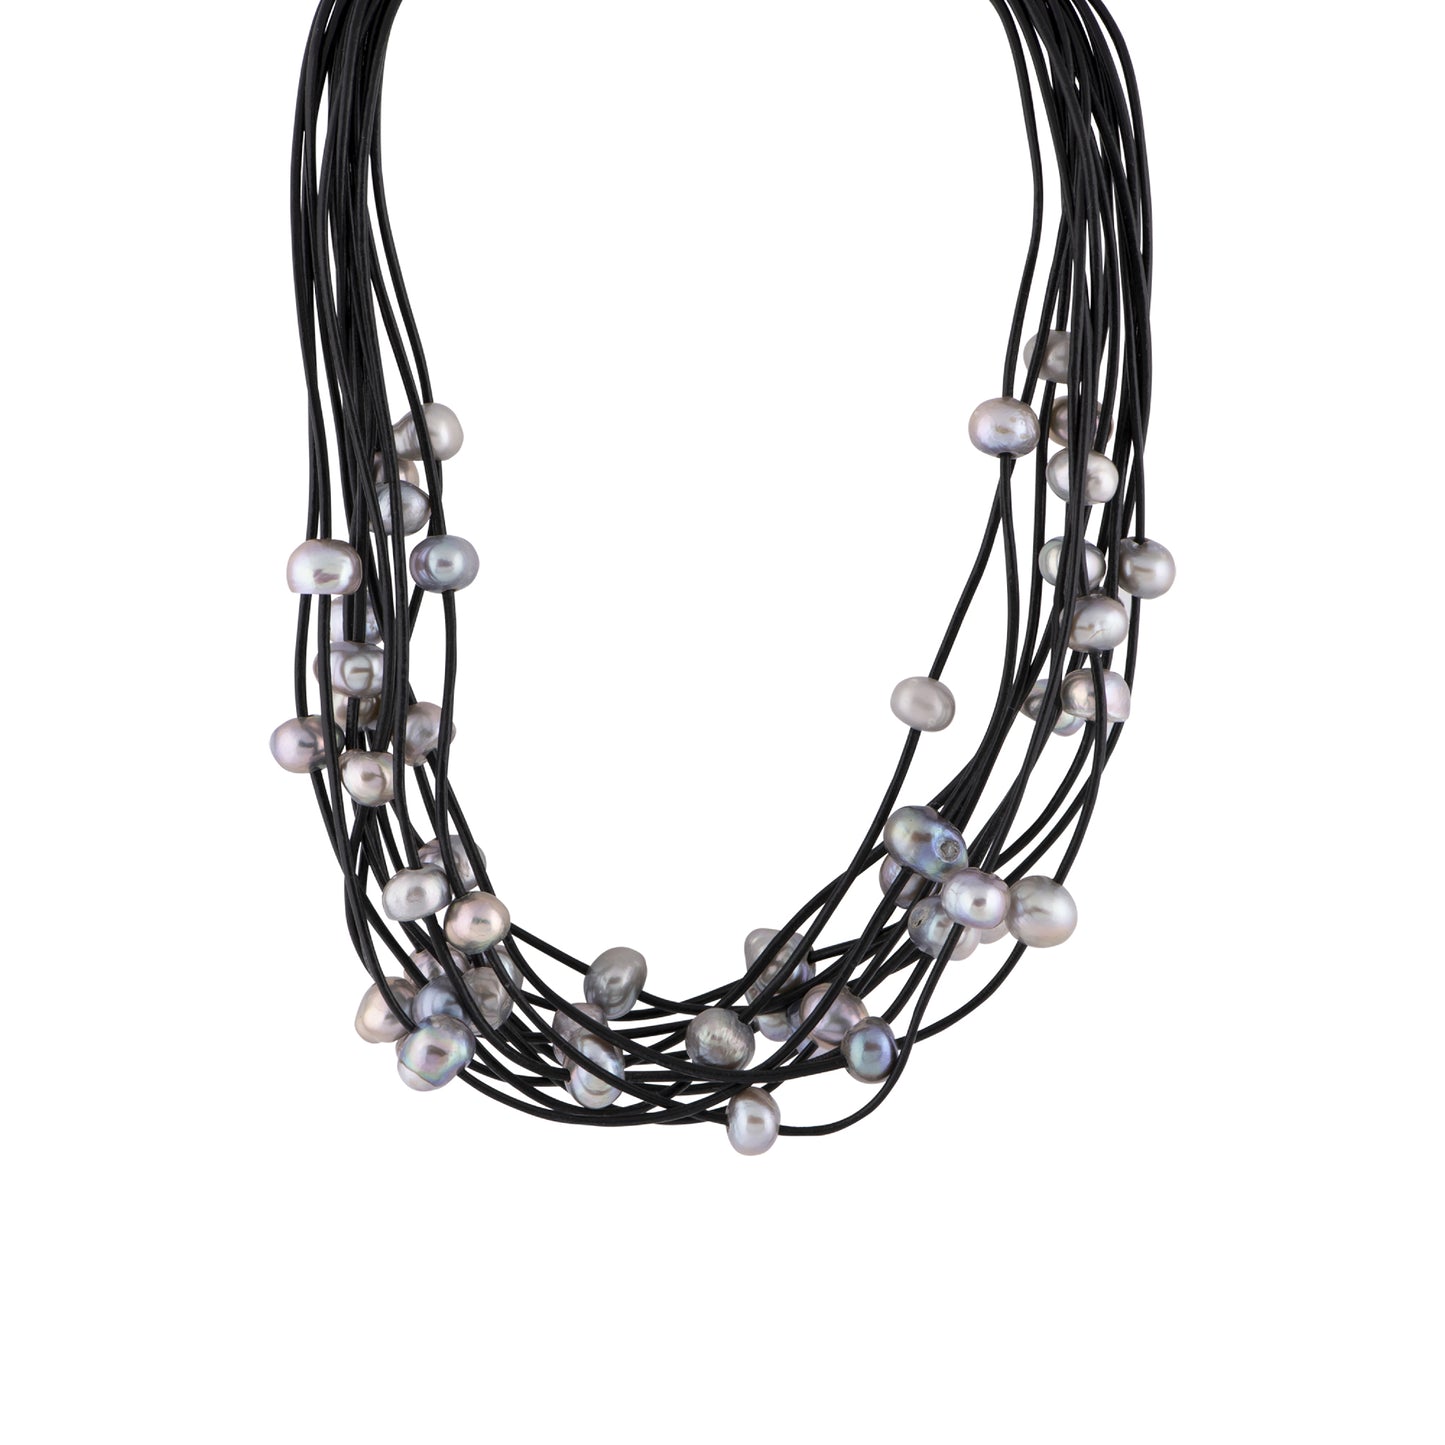 Marrianne - Leather multi-strand freshwater pearl necklace (Black strand, silver pearls)